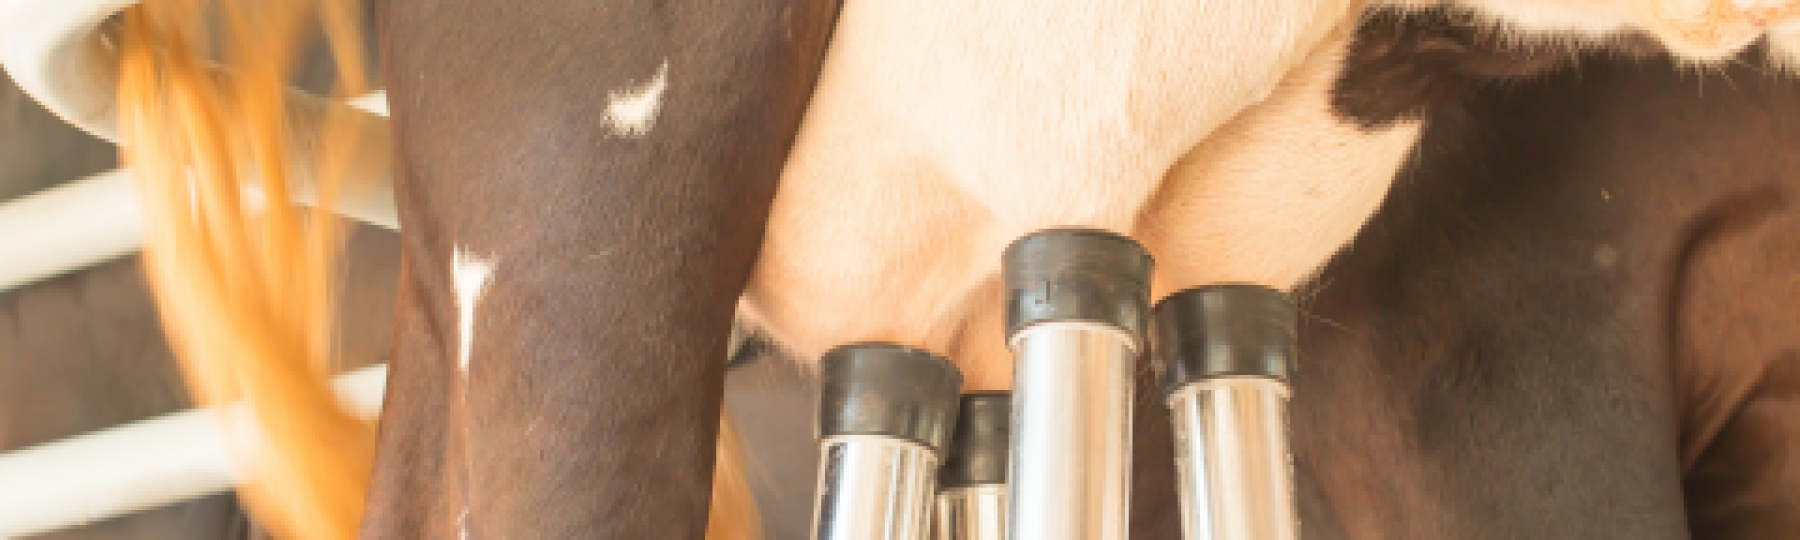 Biolectric UK - How do you increase your milk yield by 3p per litre?